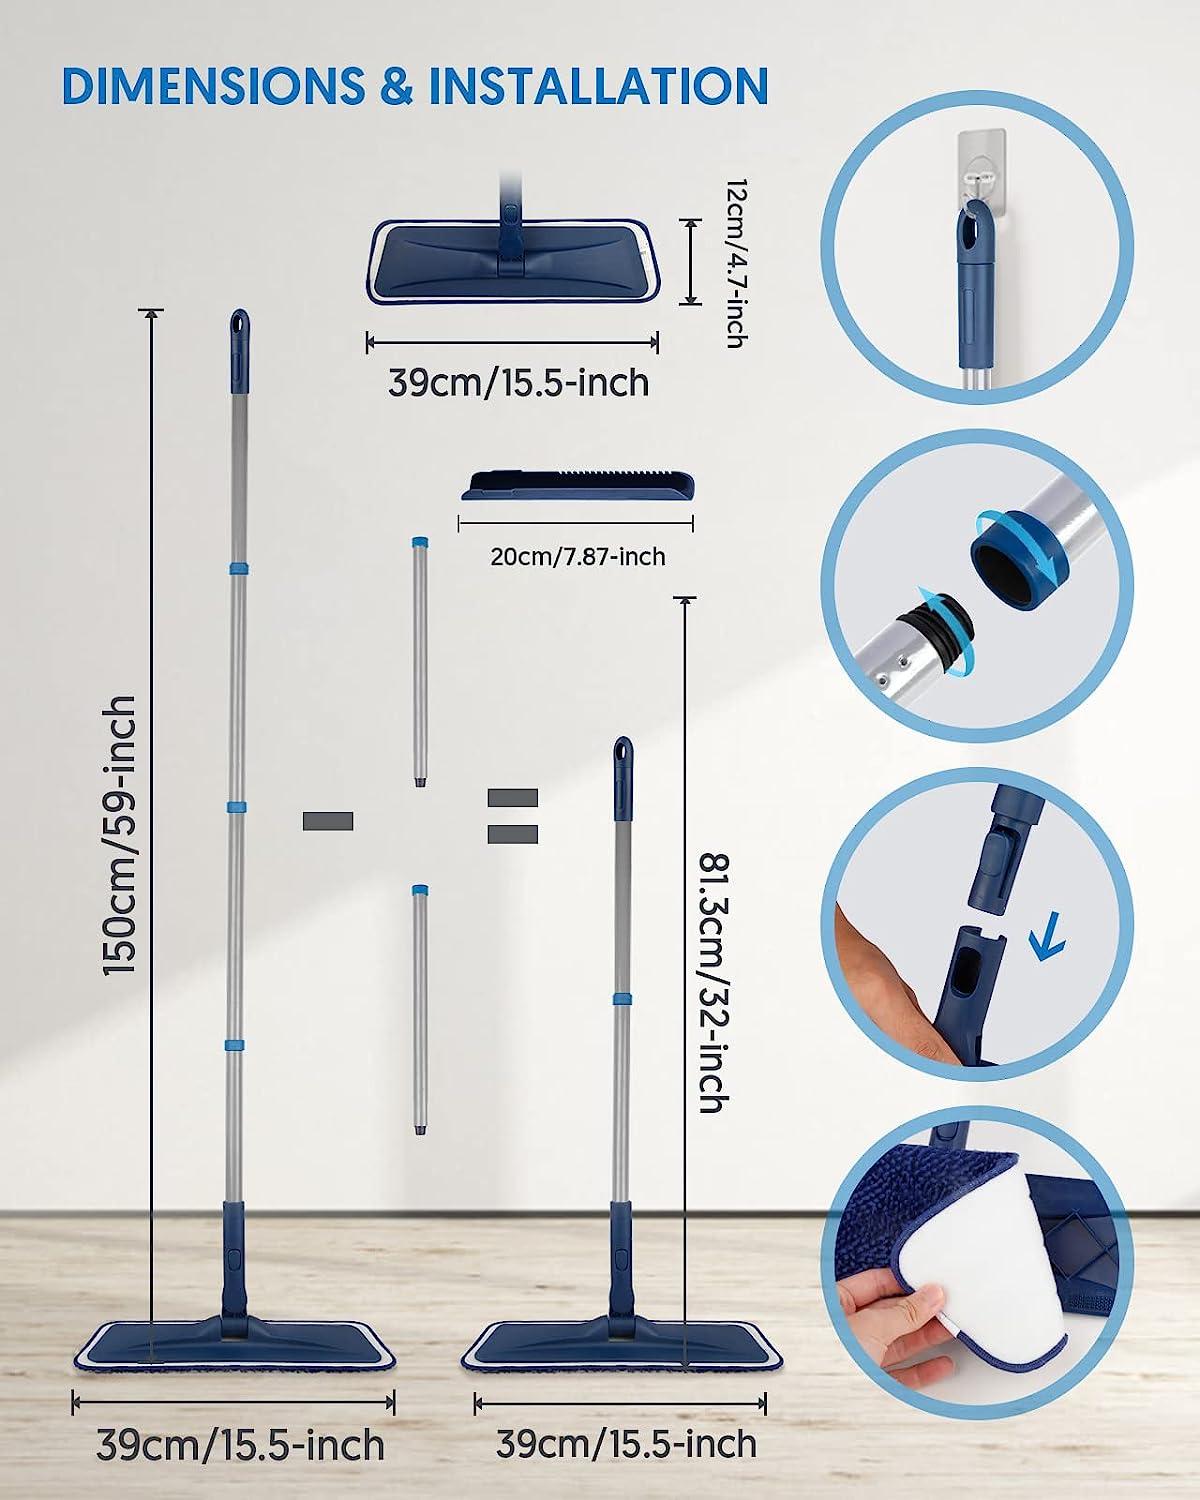 Buy them safely Mops Cleaning Walls, Mops Floor Cleaning, floor cleaning mop